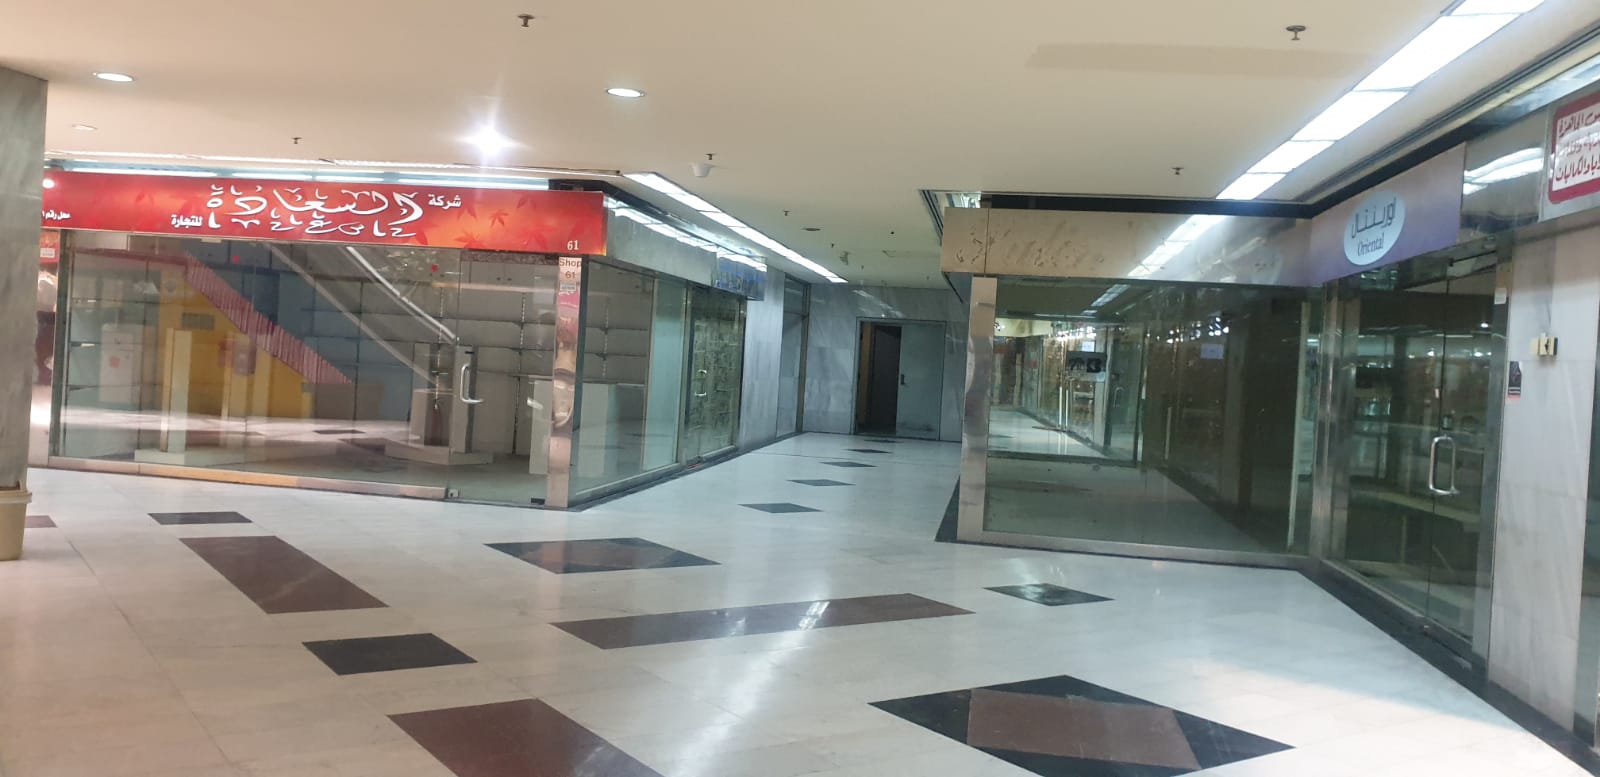 KUWAIT: Photos showing empty offices and shops inside Al-Muthanna Complex in Kuwait City. - Photos by Ben Garcian